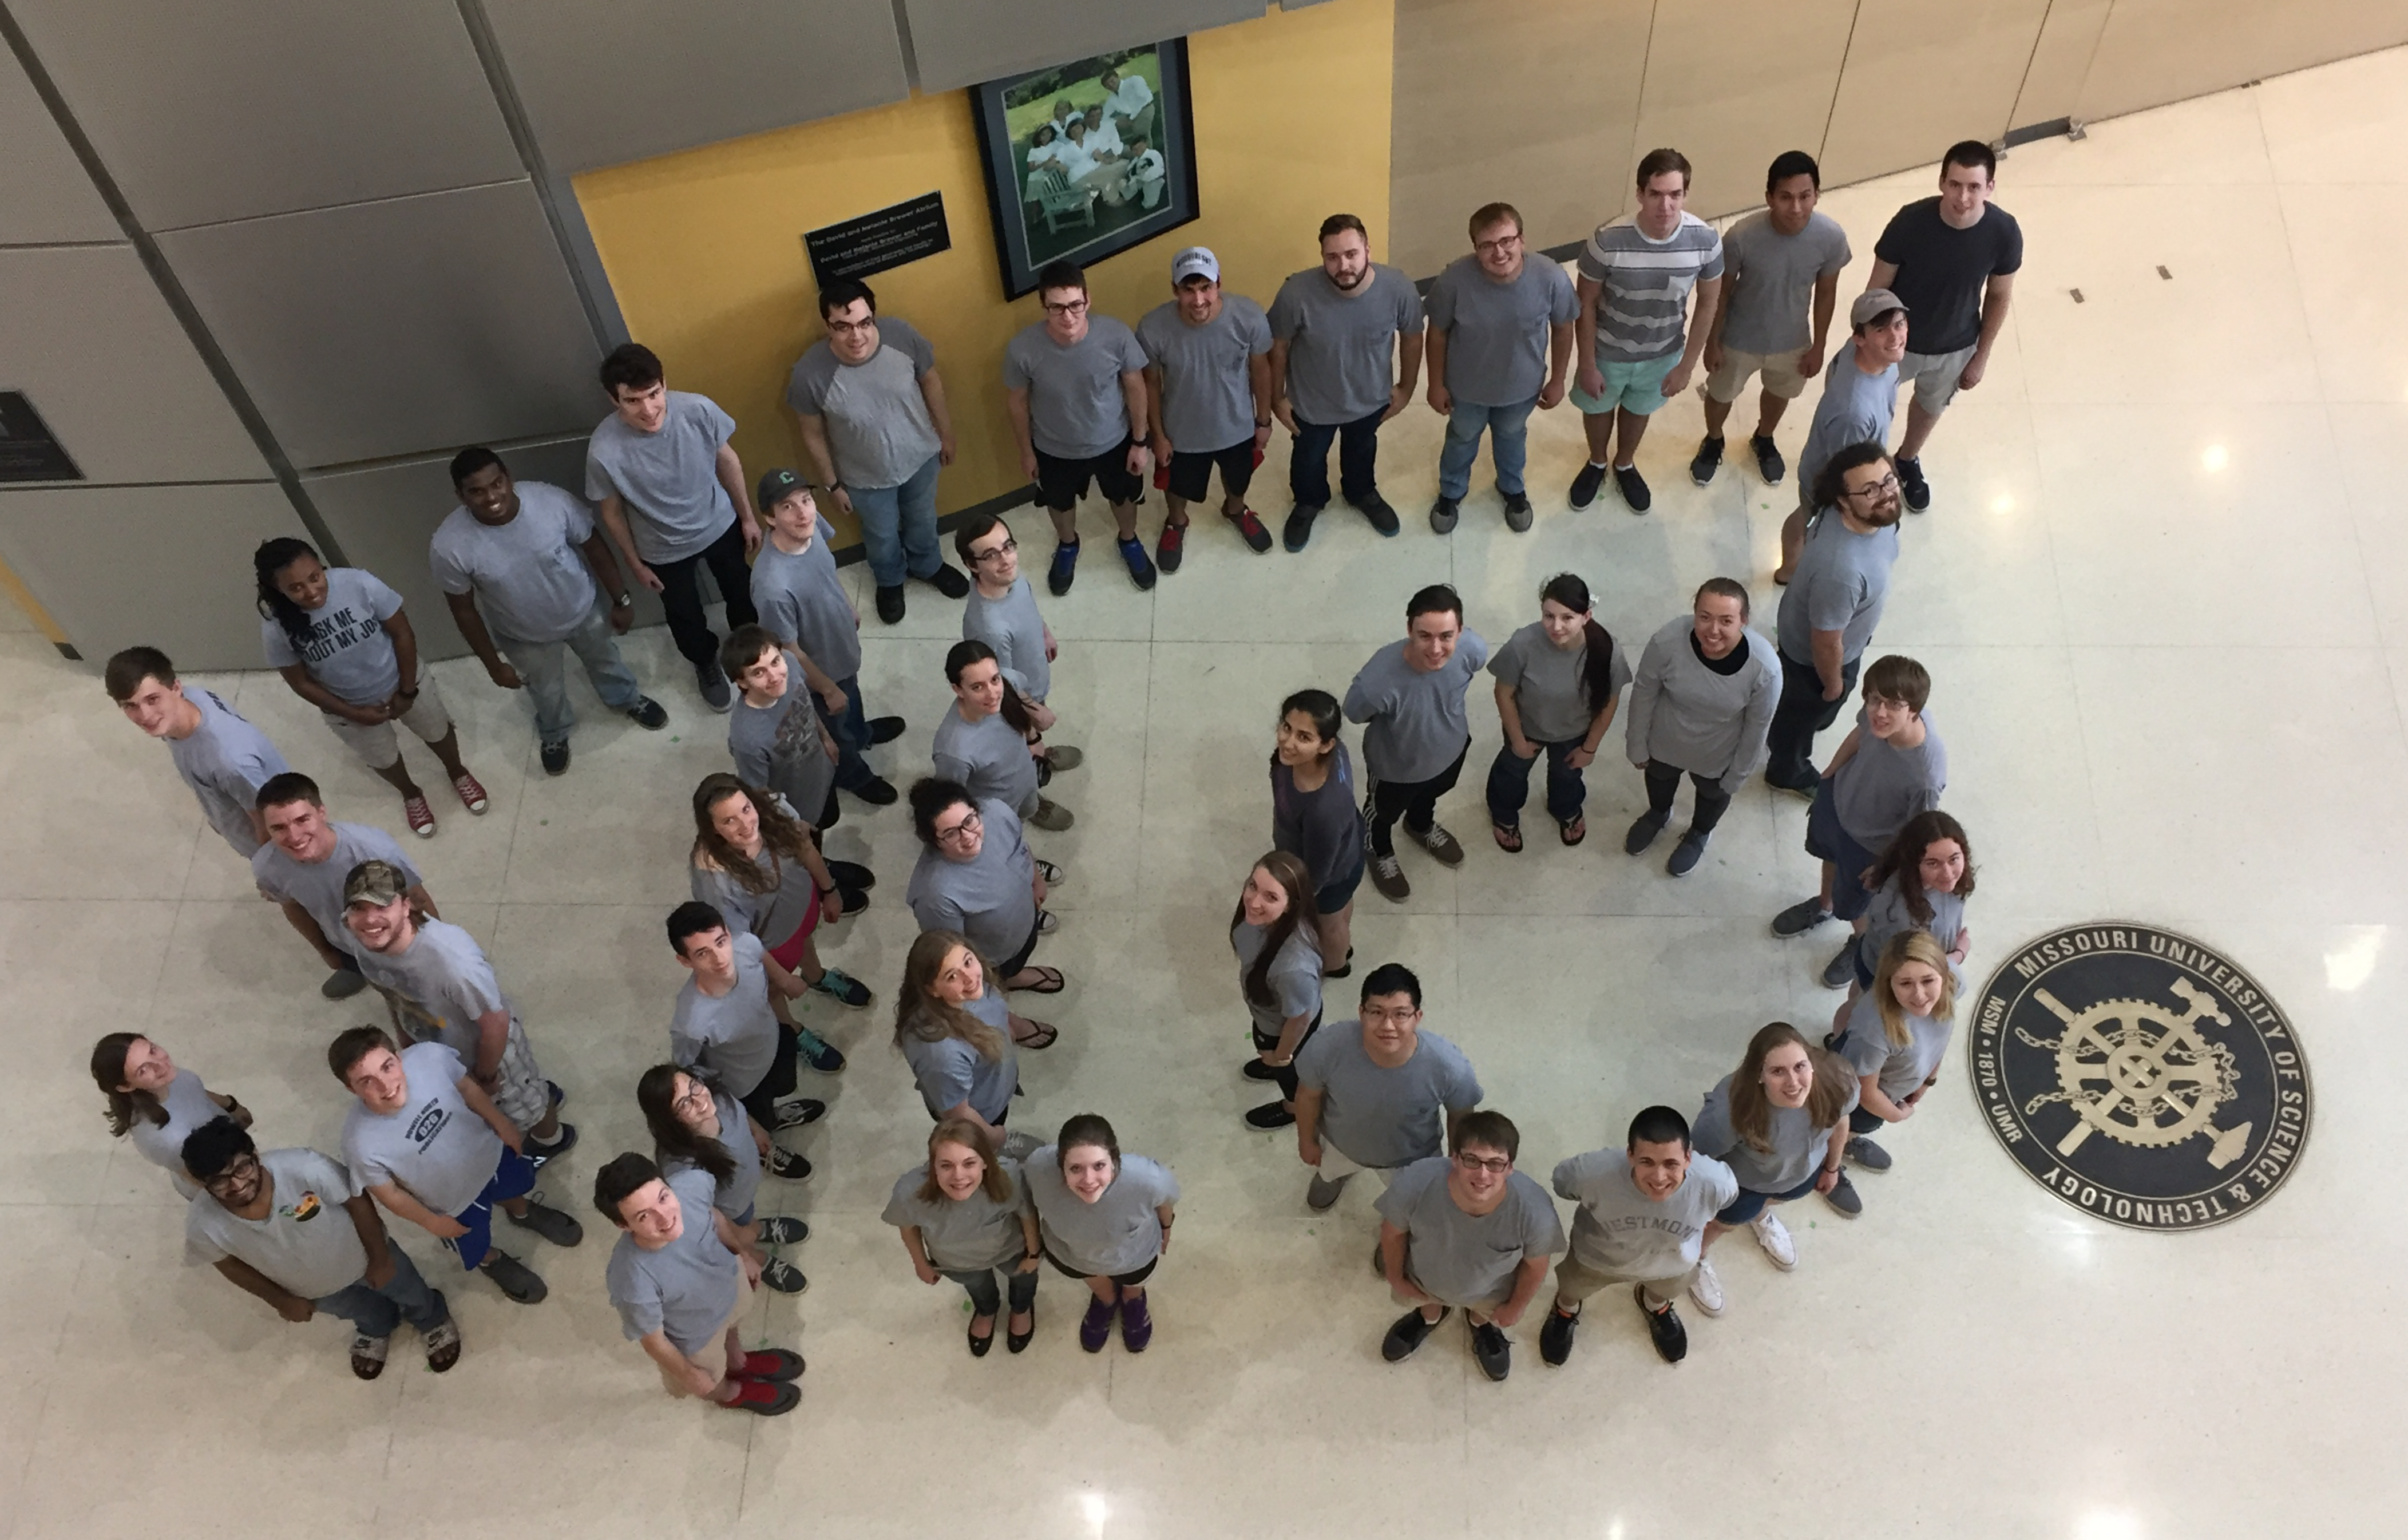 Group photo of the Missouri S&T team members for Solar Decathlon 2017.